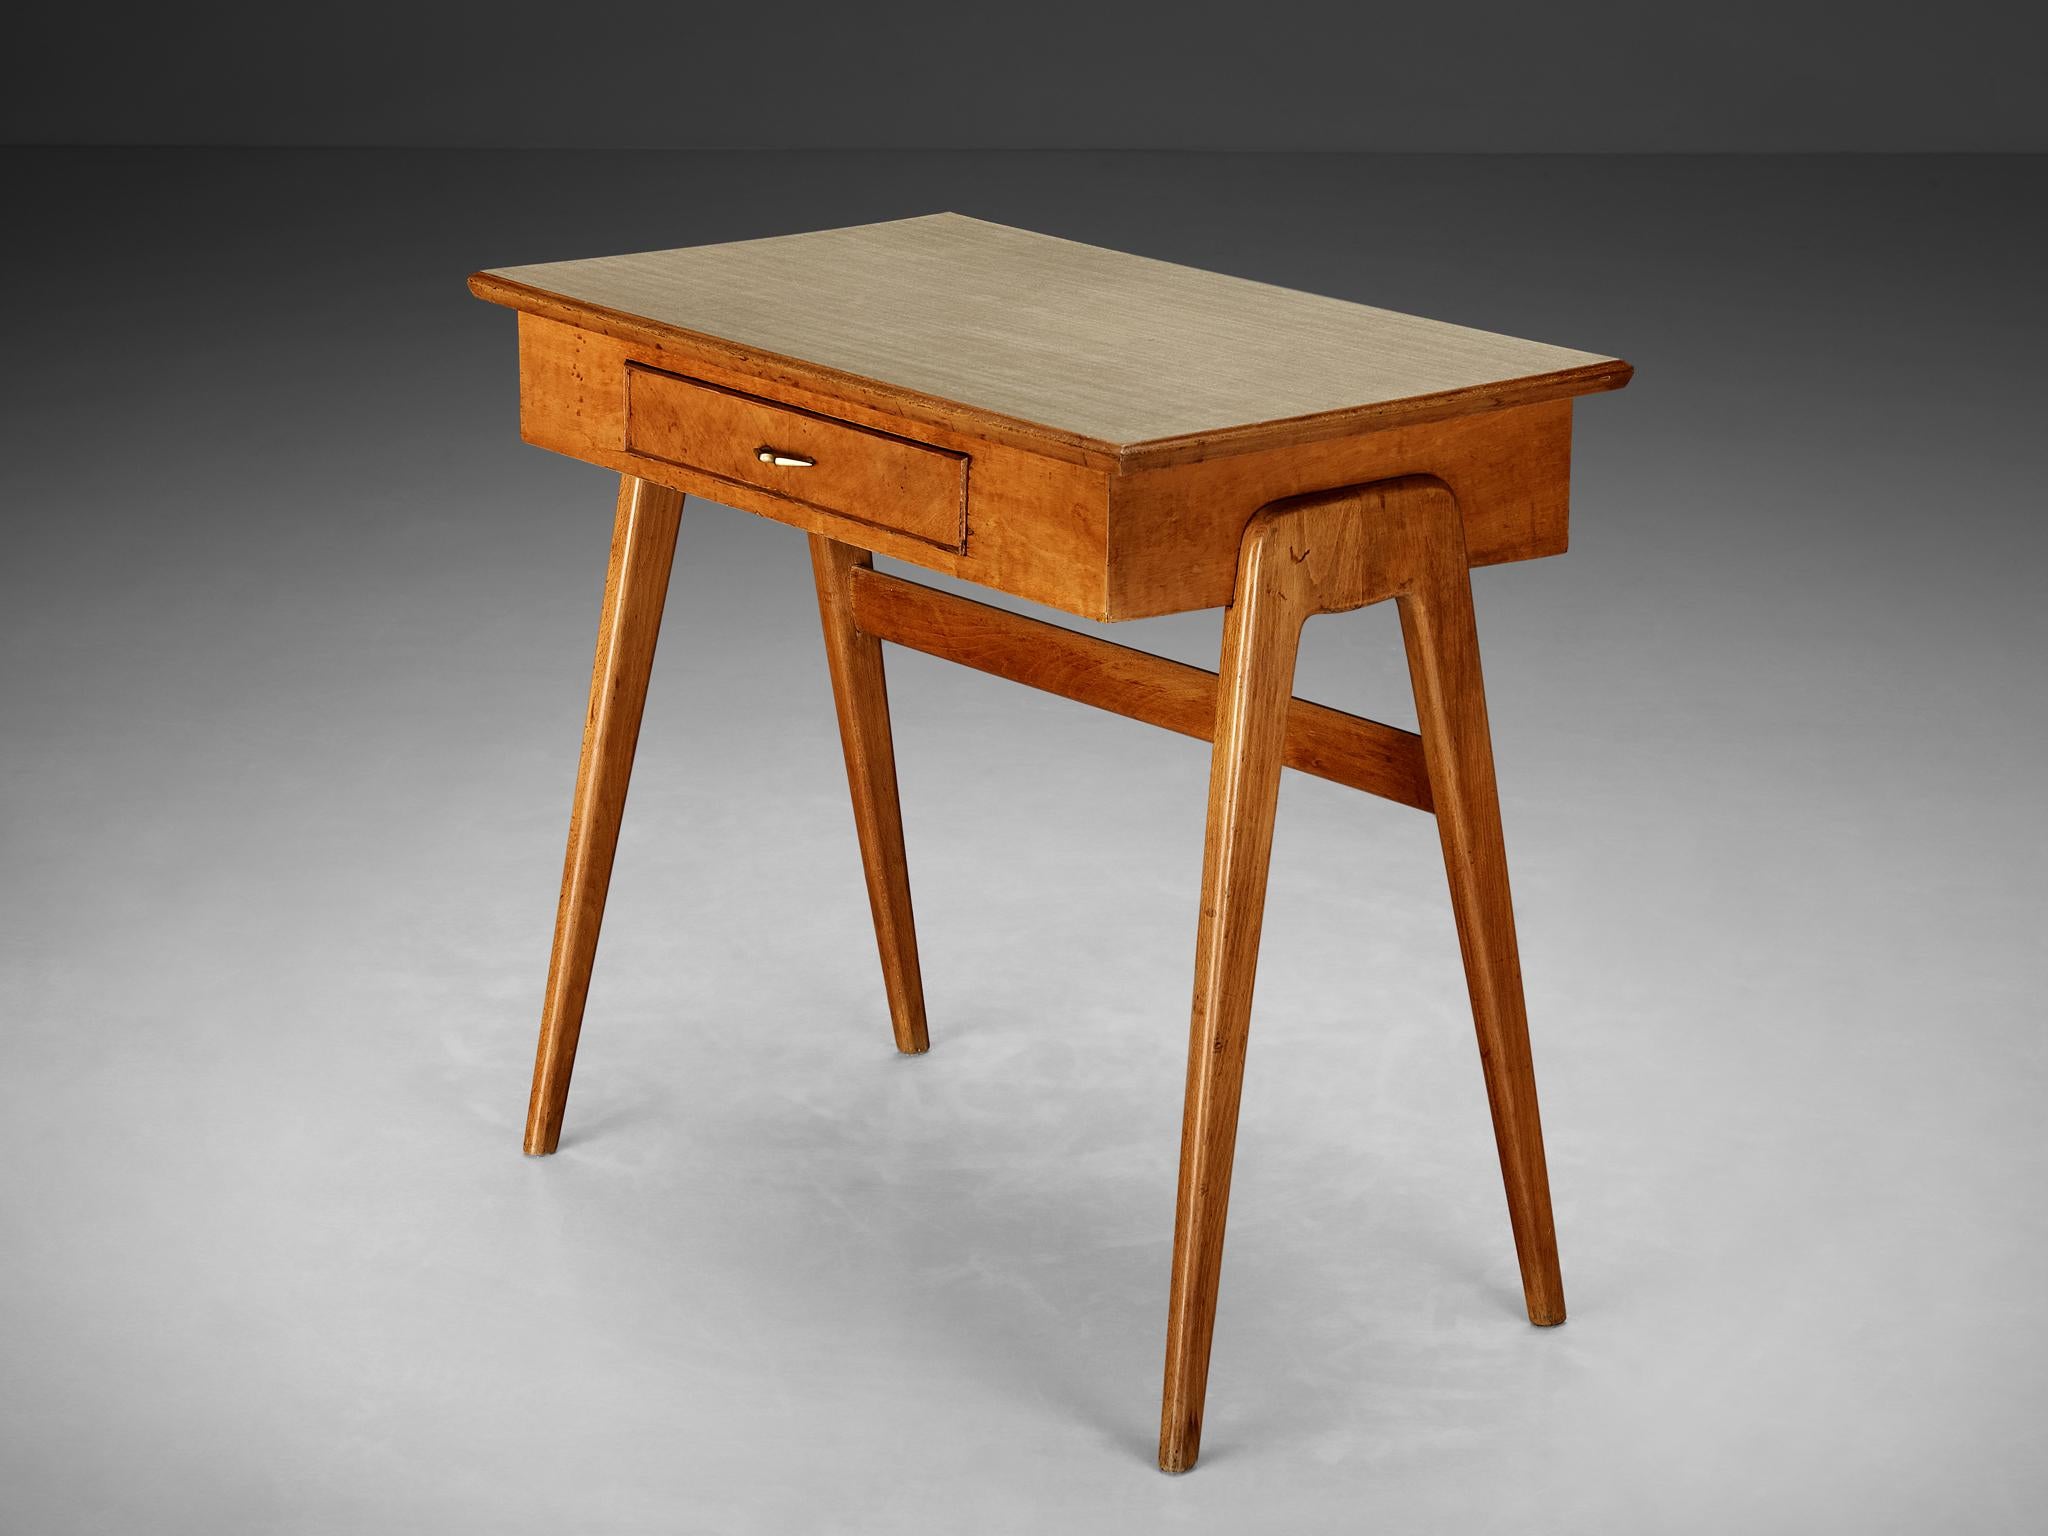 Writing desk, cherry, brass, beech, formica, Italy, 1950s

Very elegant desk made in Italy in the 1950s. The framework is executed in cherry. The upper part of this piece is made from cherry veneer, and the top is inlayed with a very practical